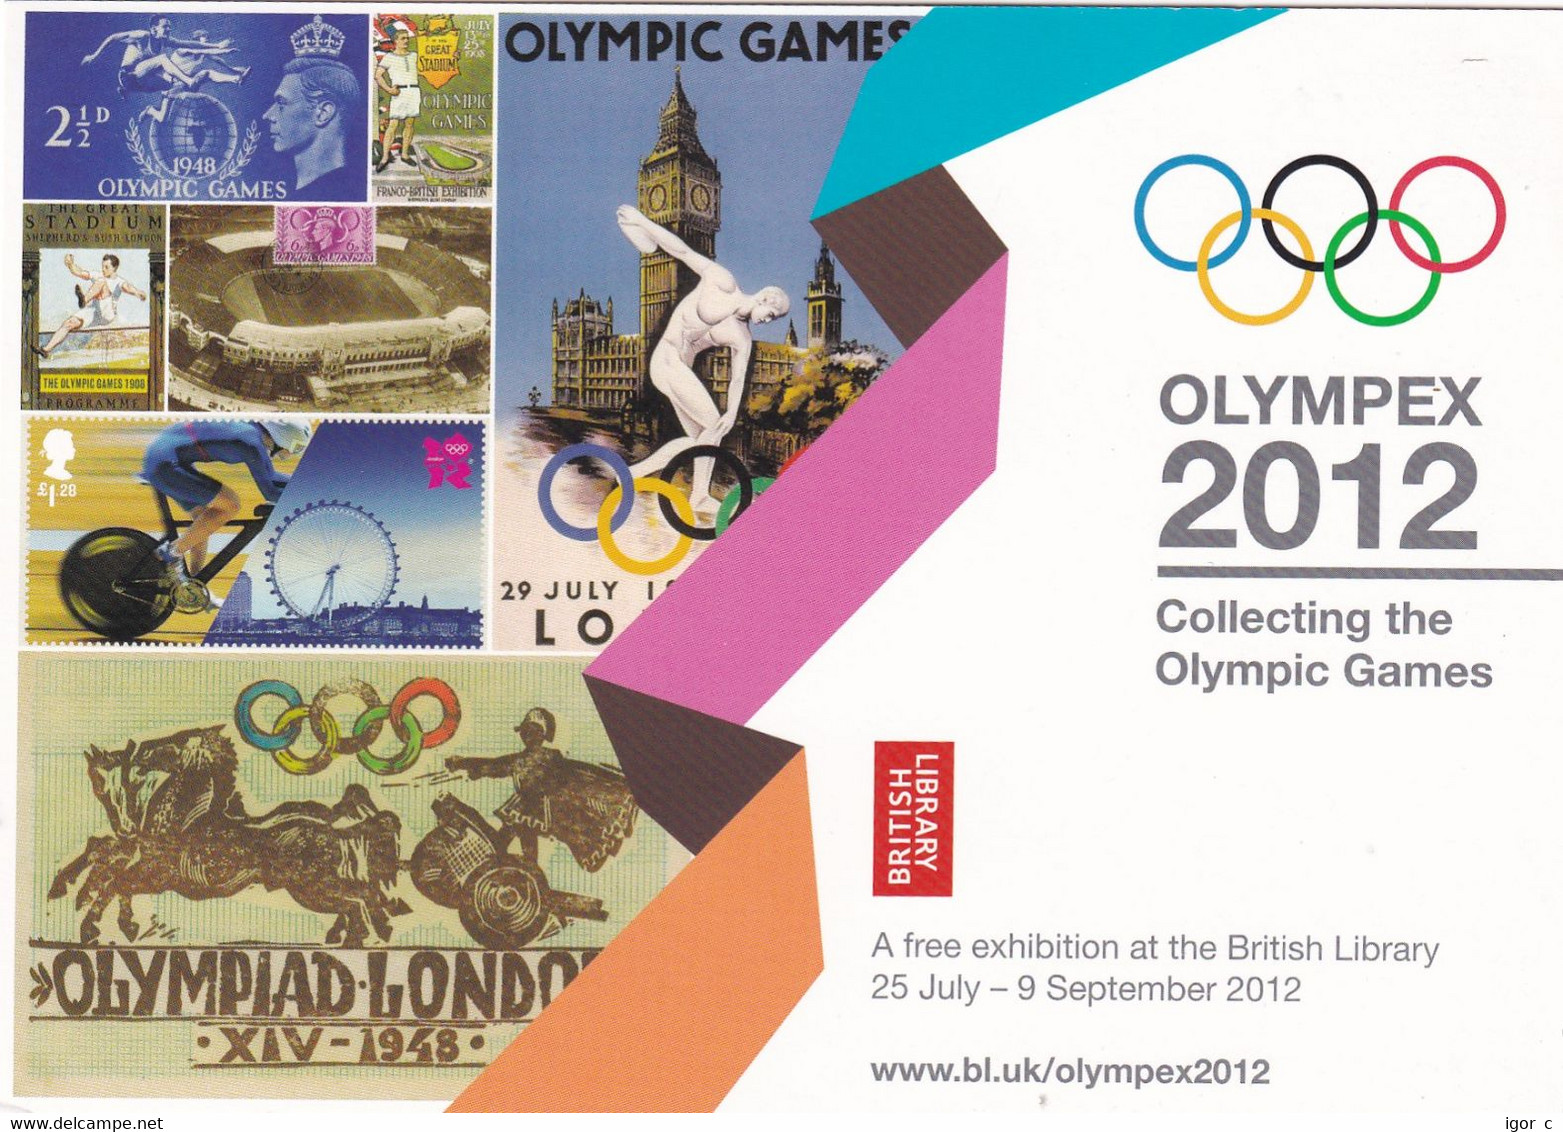 United Kingdom UK 2012 Card: Olympic Games London; Olympex 2012 STADION E20 CANCELLATION; Diving; Chatiot Race Cycling - Zomer 2028: Los Angeles